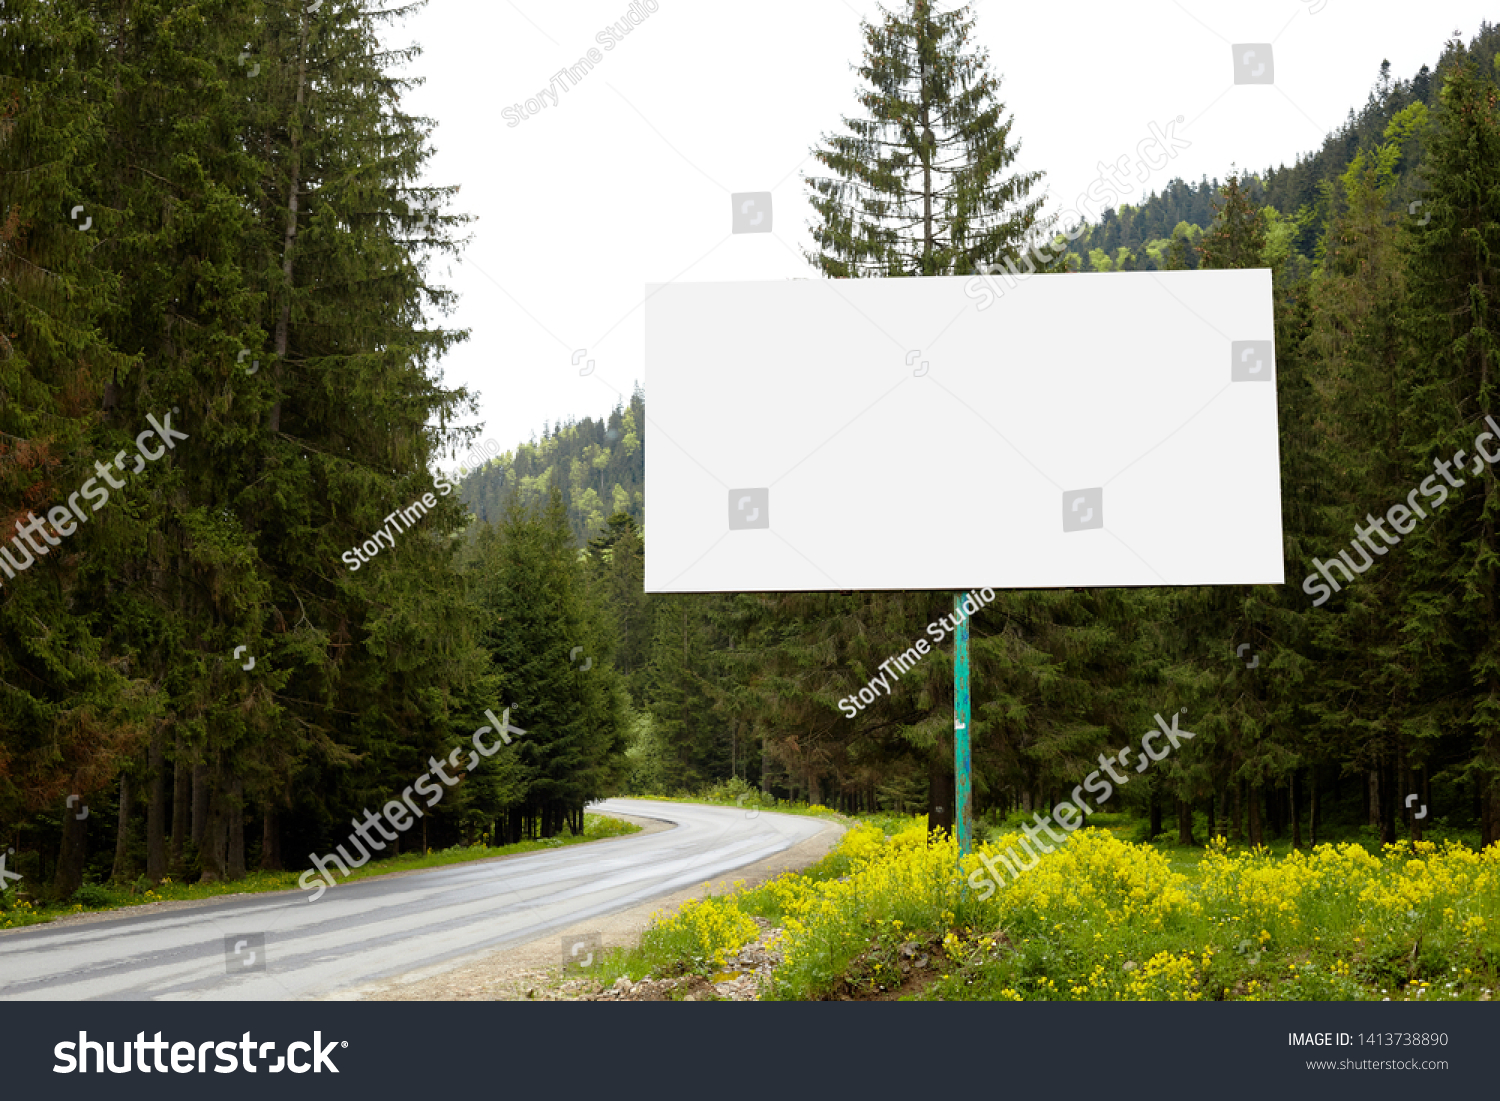 Empty billboard or big board on side of road with green forest and hills on background. Advertising blank, mock up, copy space for your advertisment or promotion text, Concept of advt and trading. #1413738890